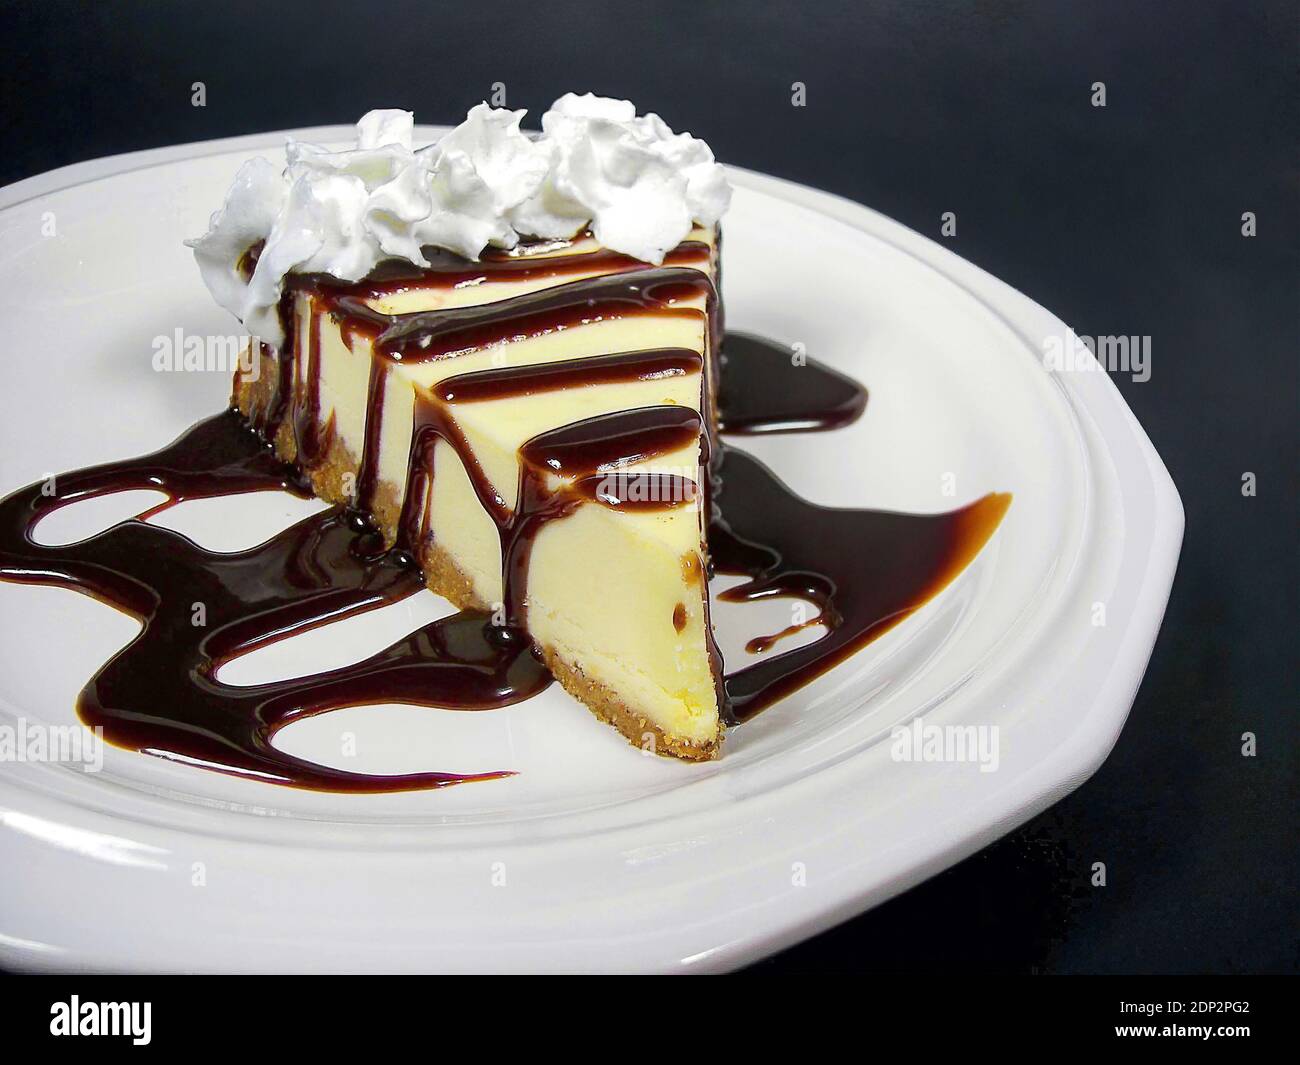 cheesecake slice with chocolate drizzle and whipped cream on white plate isolated on black Stock Photo